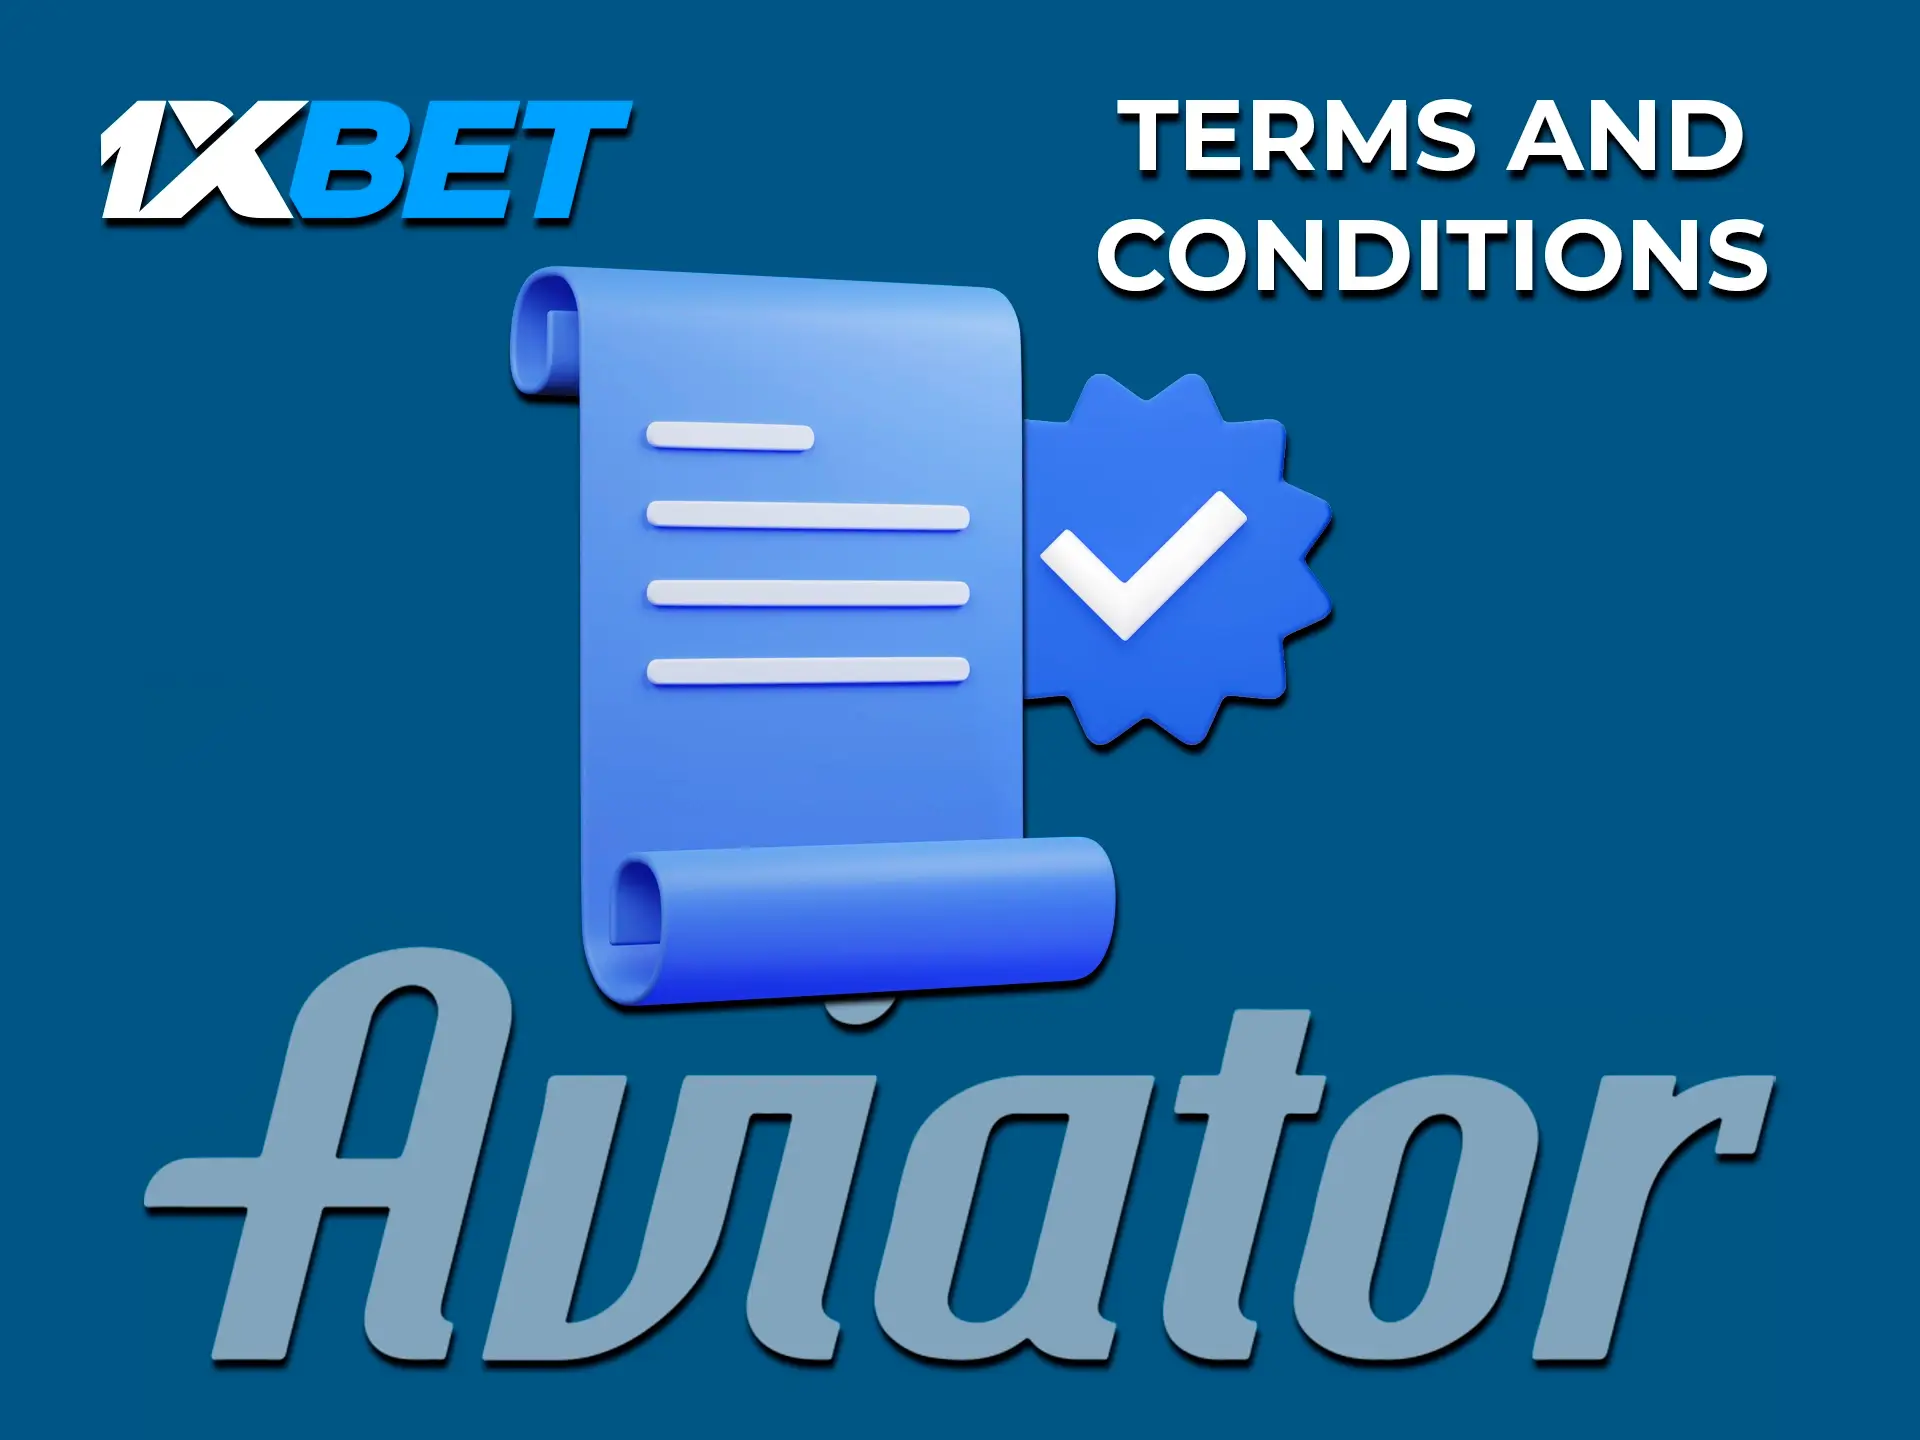 Familiarise yourself with the main rules when using the 1xBet platform to play Aviator.